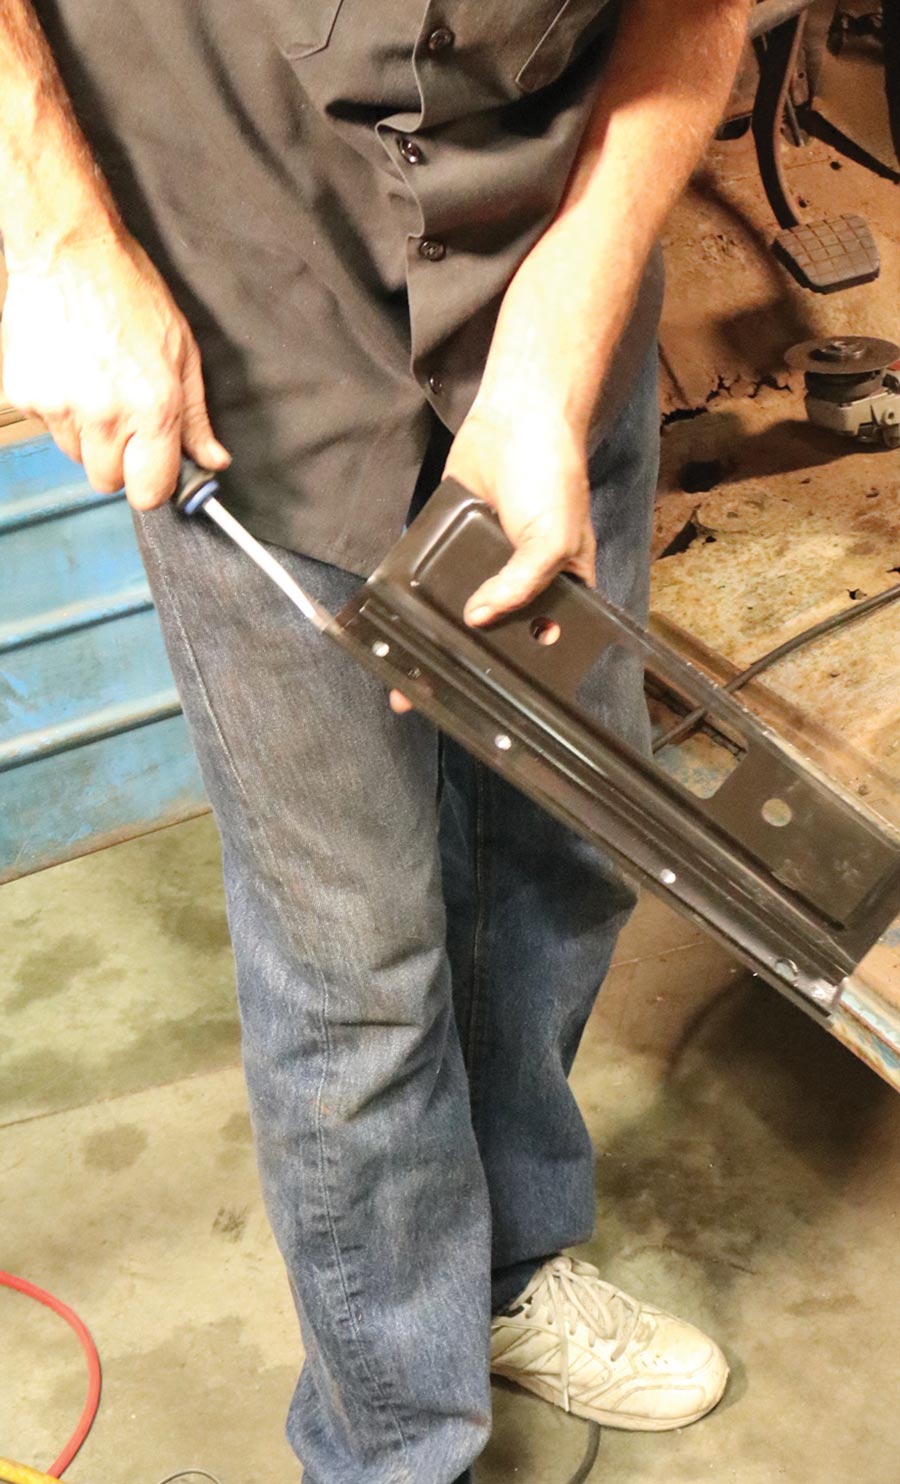 Removing the brace spot weld with a flathead screw driver